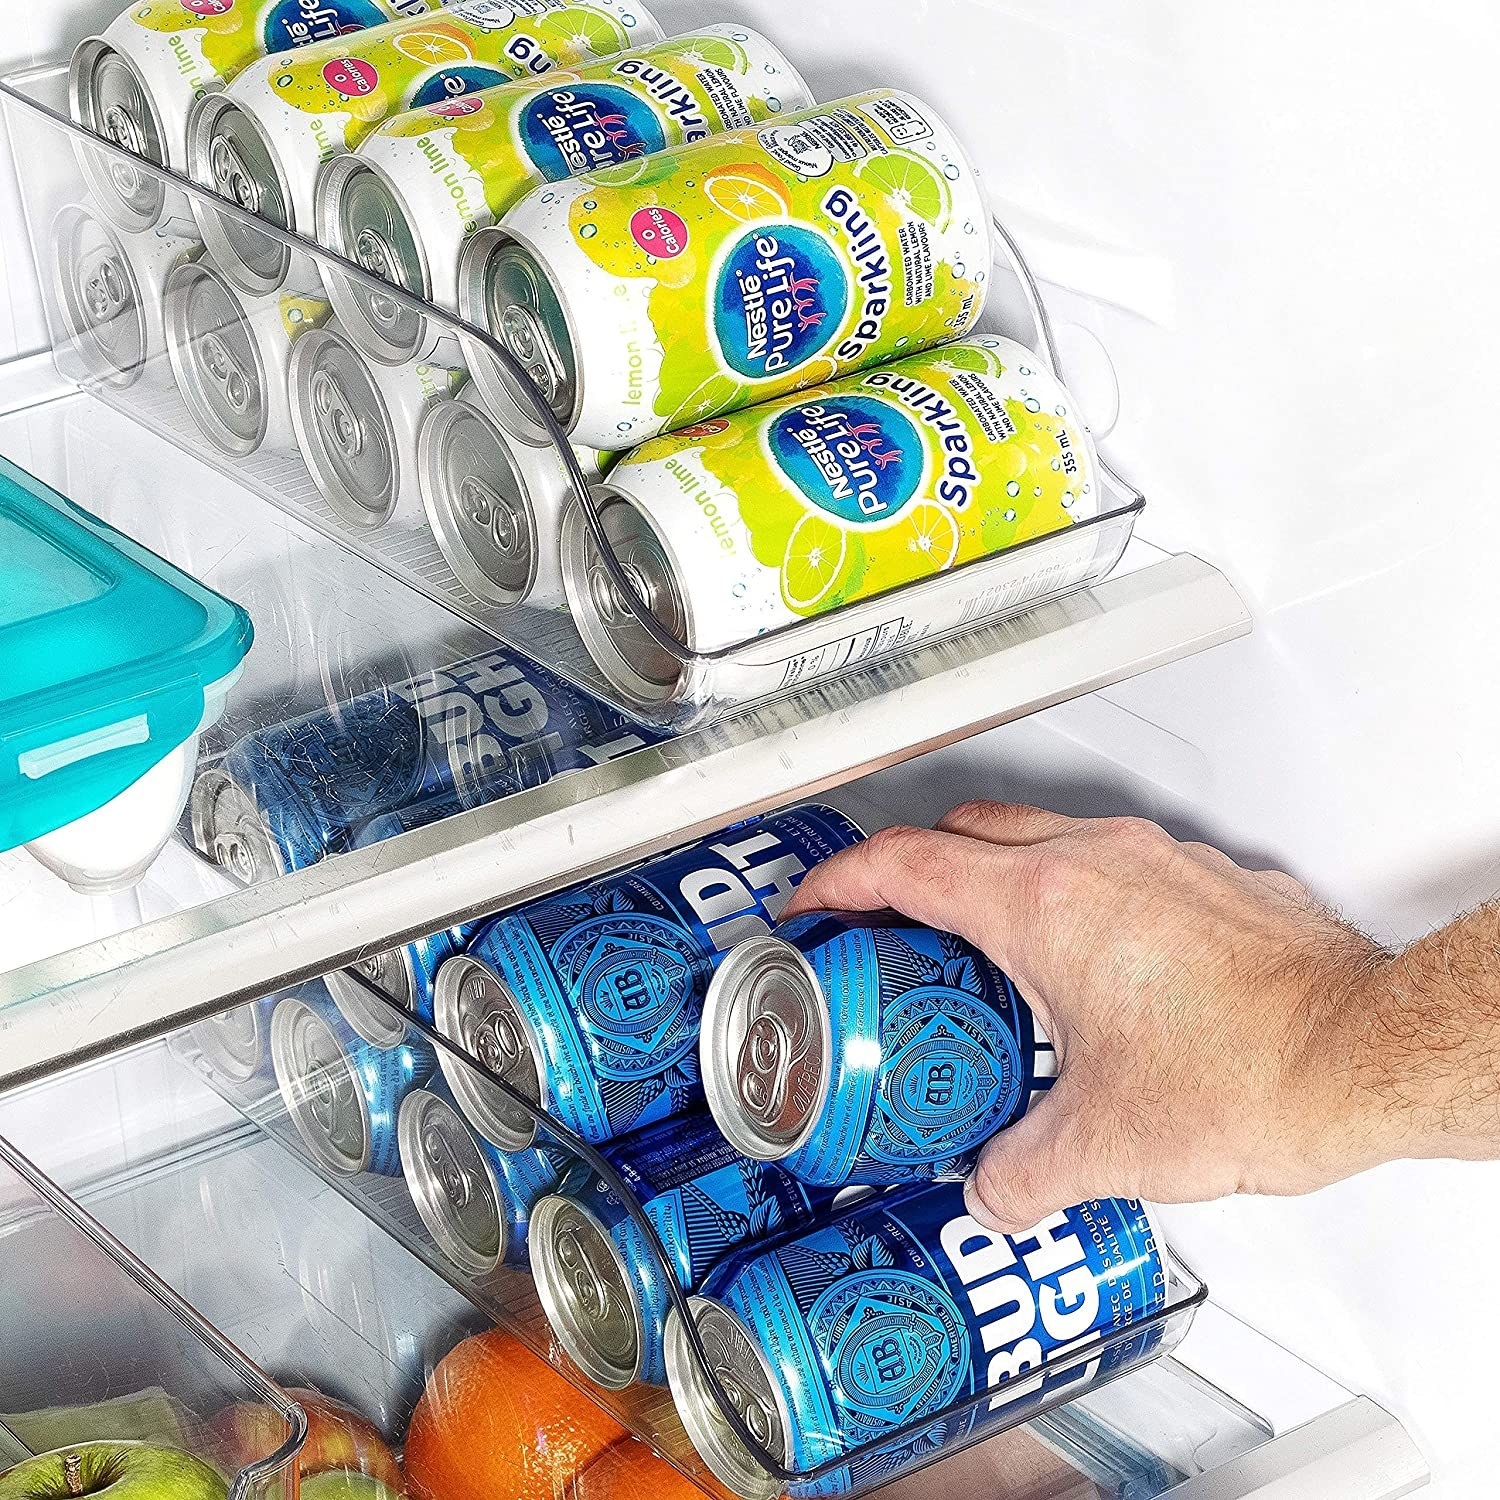 A person grabbing for a can in the fridge